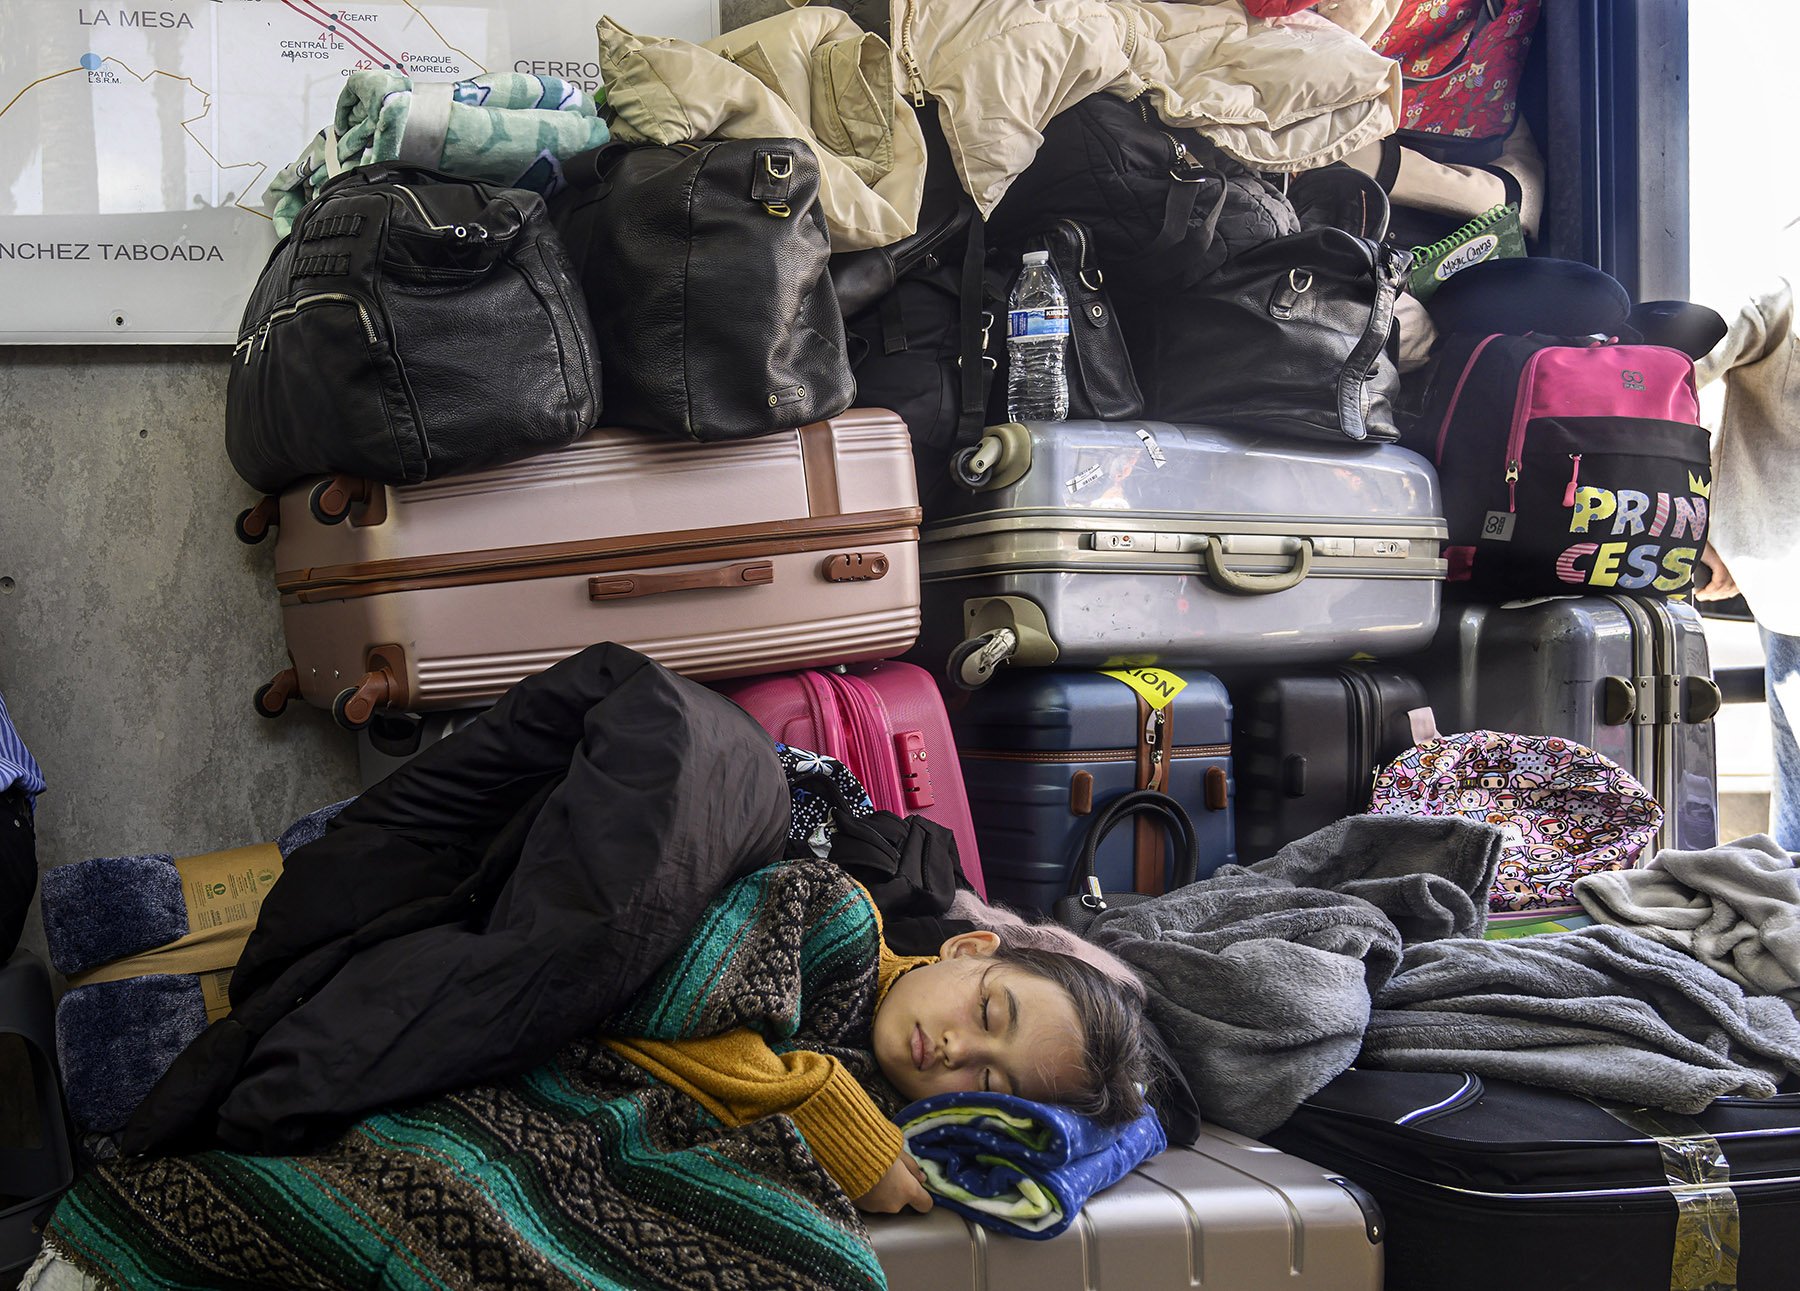  Exhausted Ukrainian families arrive in Tijuana on Wednesday, March 30, 2022. Many of them have traveled about a month to reach the Mexican border and will have to wait sometimes more than 24 hours before they are processed through the U.S. as asylum